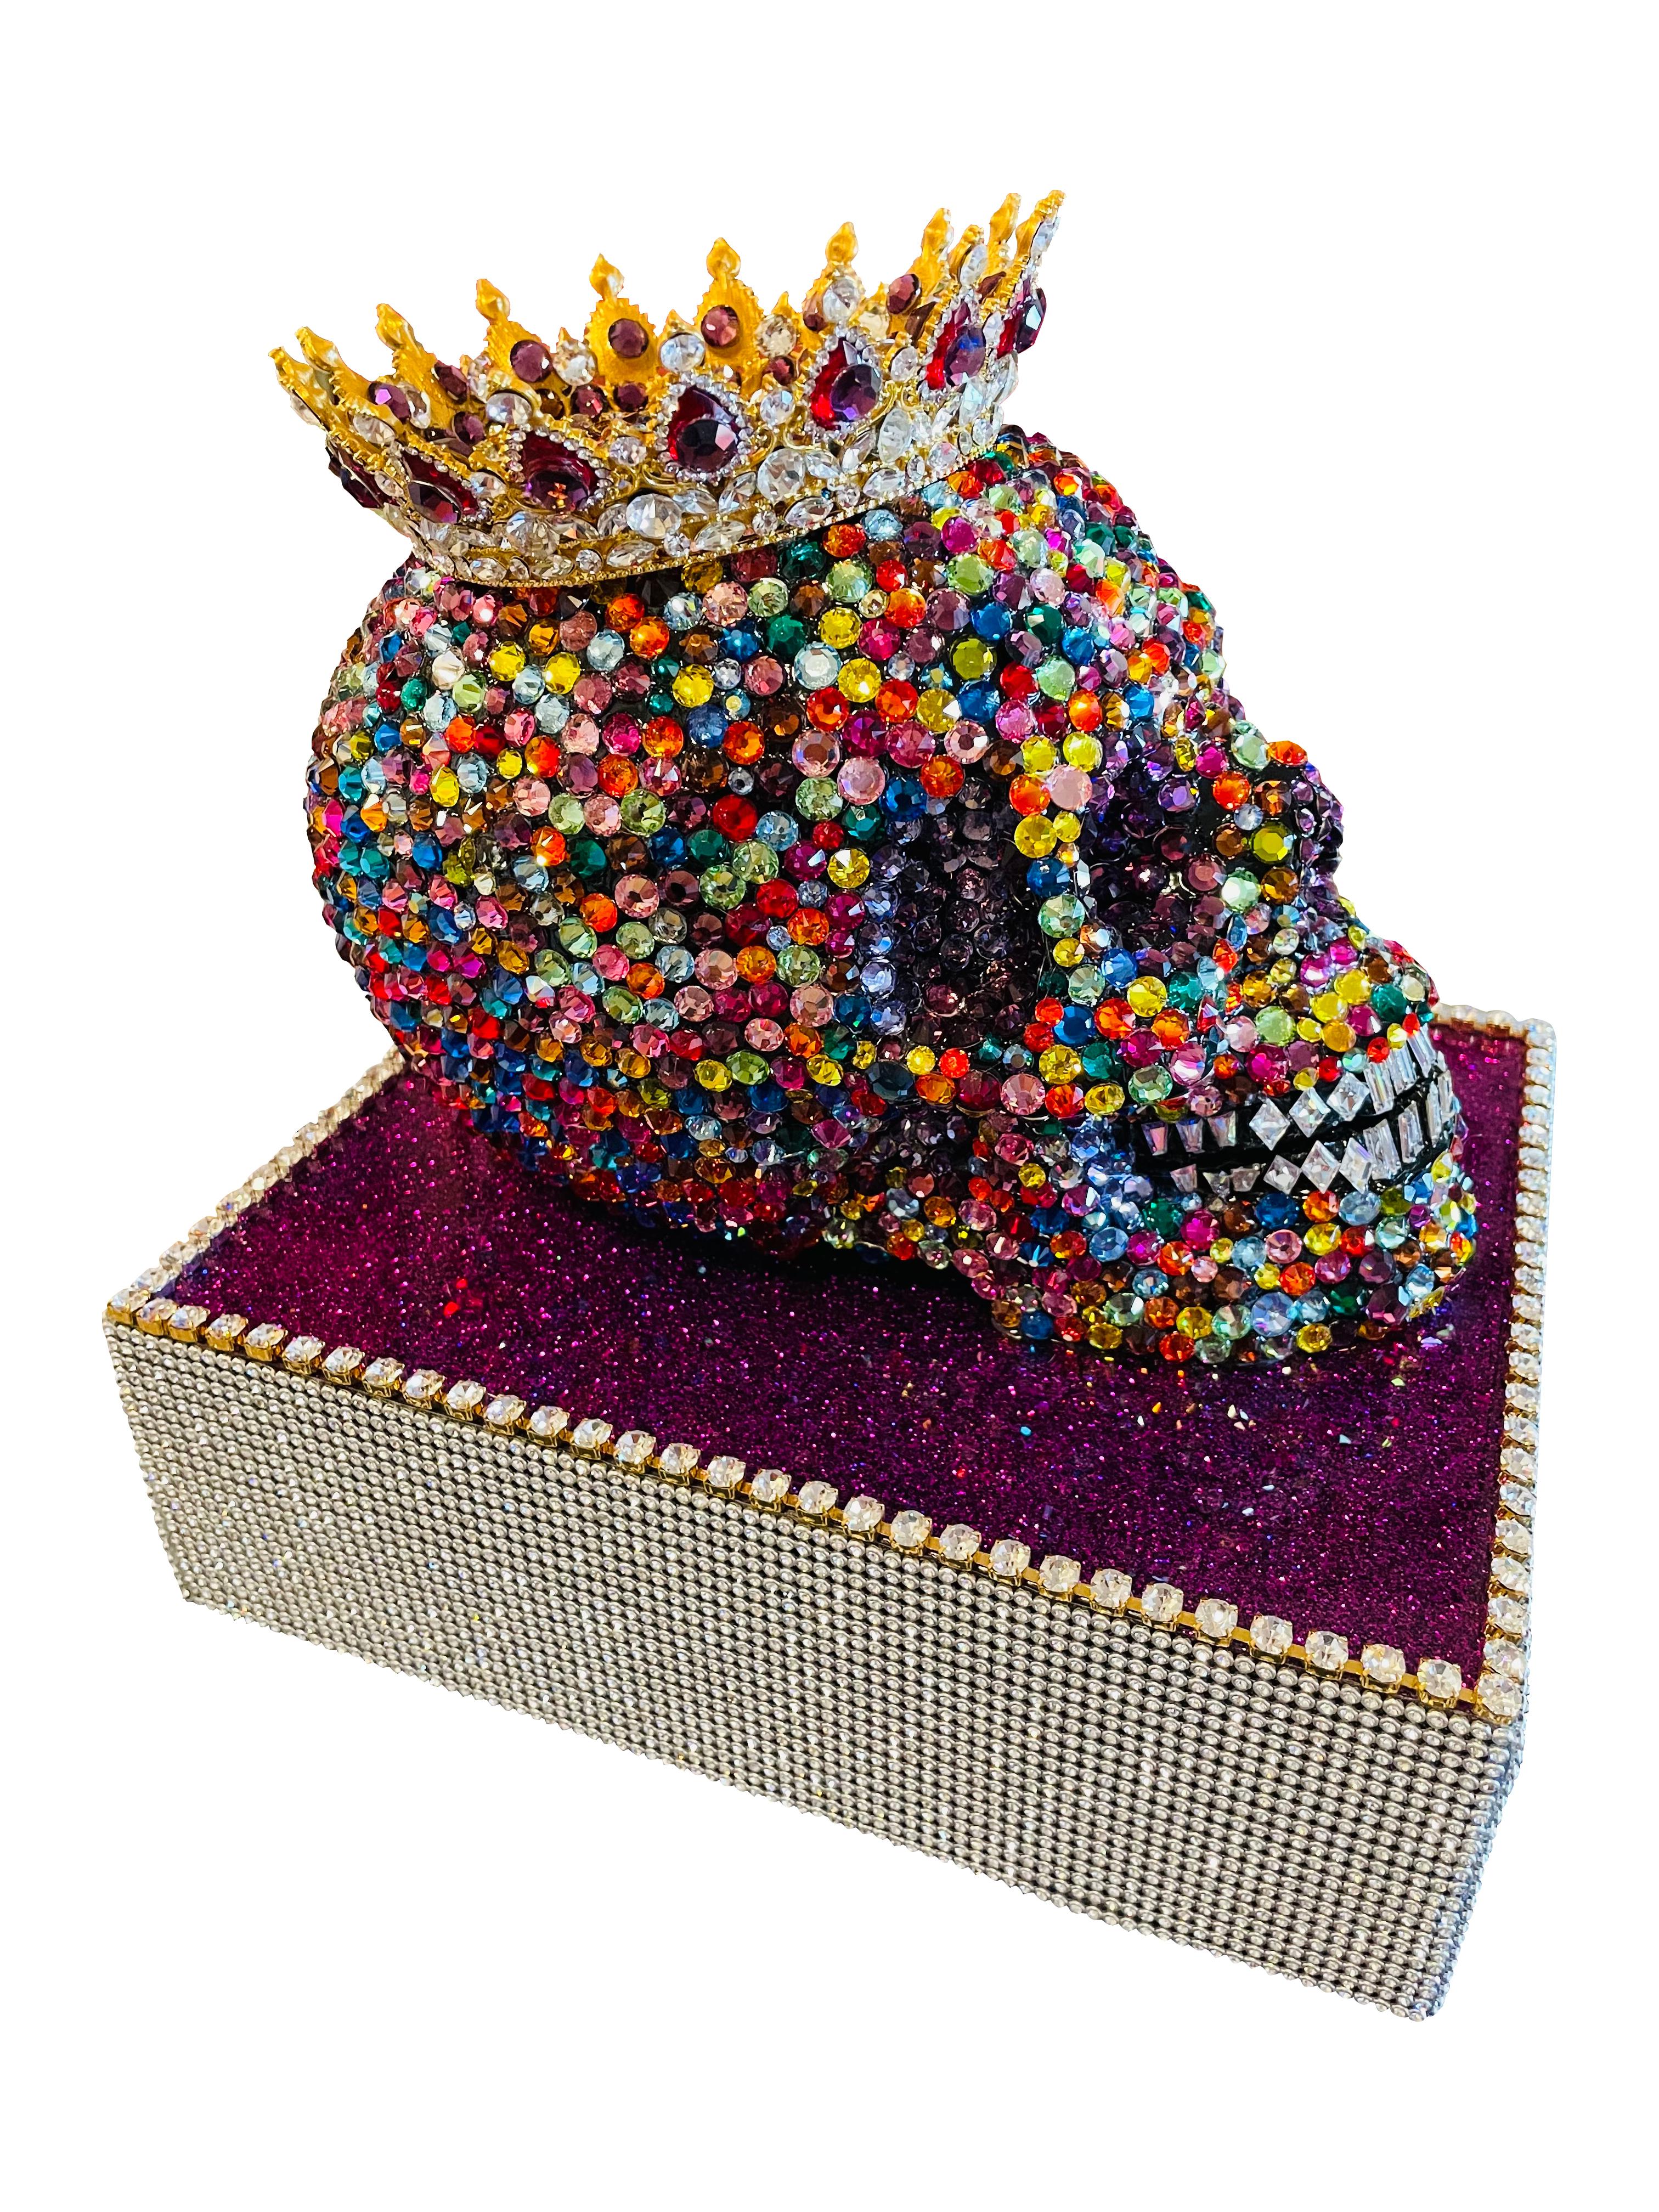 KING PRINCE: THE LEGEND LIVES ON (Swarovski Skull w/ Custom Base + Crown) - Contemporary Sculpture by Mauro Oliveira